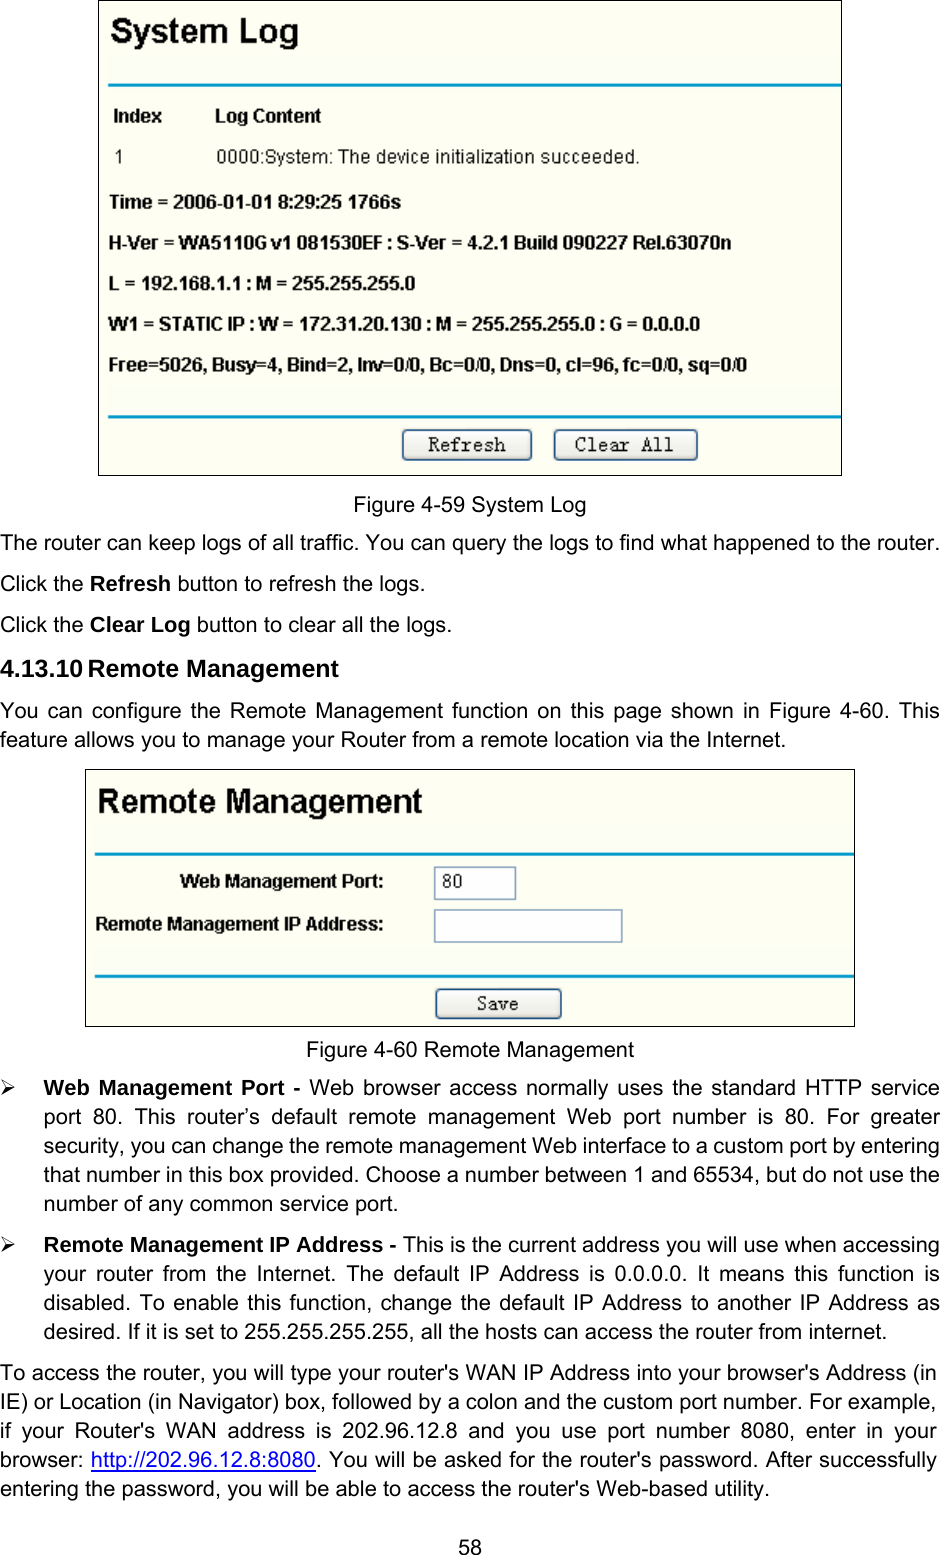  58  Figure 4-59 System Log The router can keep logs of all traffic. You can query the logs to find what happened to the router. Click the Refresh button to refresh the logs. Click the Clear Log button to clear all the logs. 4.13.10 Remote Management You can configure the Remote Management function on this page shown in Figure 4-60. This feature allows you to manage your Router from a remote location via the Internet.   Figure 4-60 Remote Management ¾ Web Management Port - Web browser access normally uses the standard HTTP service port 80. This router’s default remote management Web port number is 80. For greater security, you can change the remote management Web interface to a custom port by entering that number in this box provided. Choose a number between 1 and 65534, but do not use the number of any common service port. ¾ Remote Management IP Address - This is the current address you will use when accessing your router from the Internet. The default IP Address is 0.0.0.0. It means this function is disabled. To enable this function, change the default IP Address to another IP Address as desired. If it is set to 255.255.255.255, all the hosts can access the router from internet. To access the router, you will type your router&apos;s WAN IP Address into your browser&apos;s Address (in IE) or Location (in Navigator) box, followed by a colon and the custom port number. For example, if your Router&apos;s WAN address is 202.96.12.8 and you use port number 8080, enter in your browser: http://202.96.12.8:8080. You will be asked for the router&apos;s password. After successfully entering the password, you will be able to access the router&apos;s Web-based utility. 